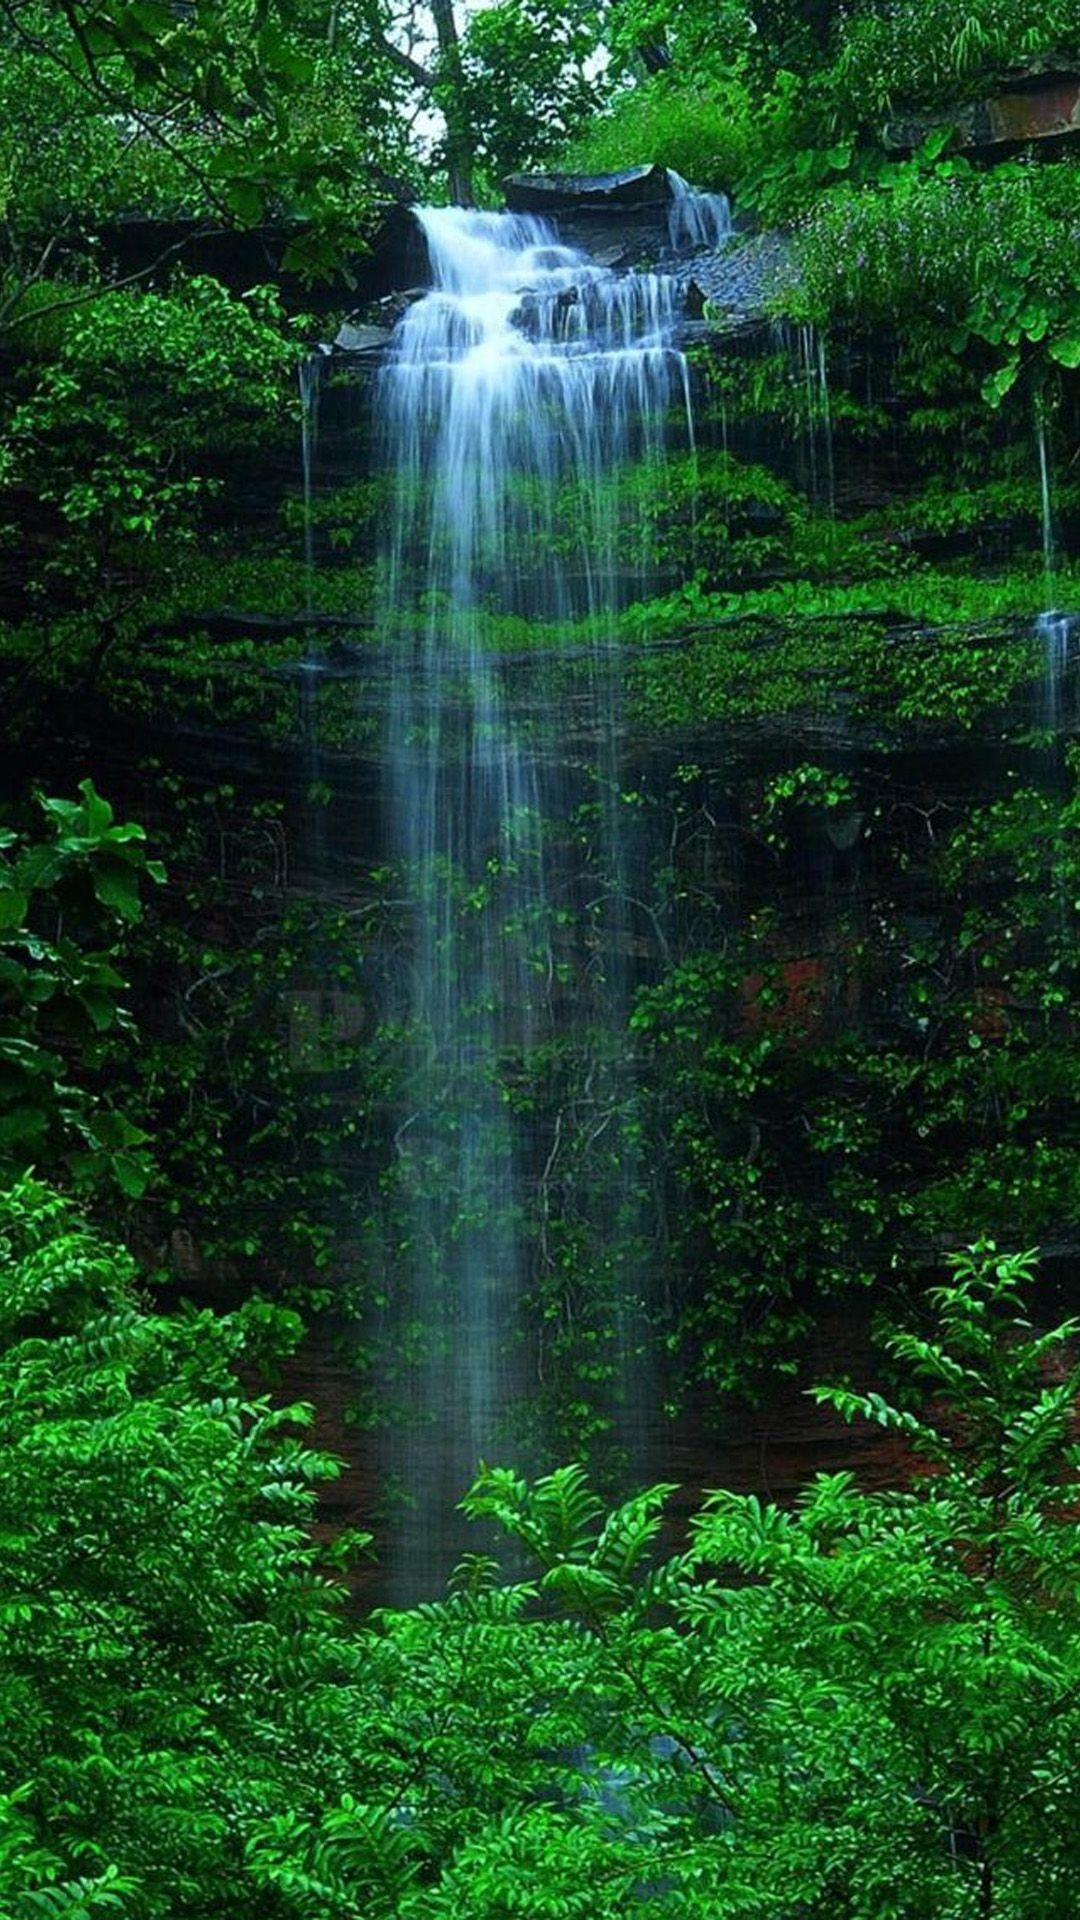 Nature Forest Waterfall IPhone 6 Wallpaper Download. IPhone Wallpaper, IPad Wallpaper One St. Waterfall Wallpaper, Forest Waterfall, IPhone Wallpaper Waterfall